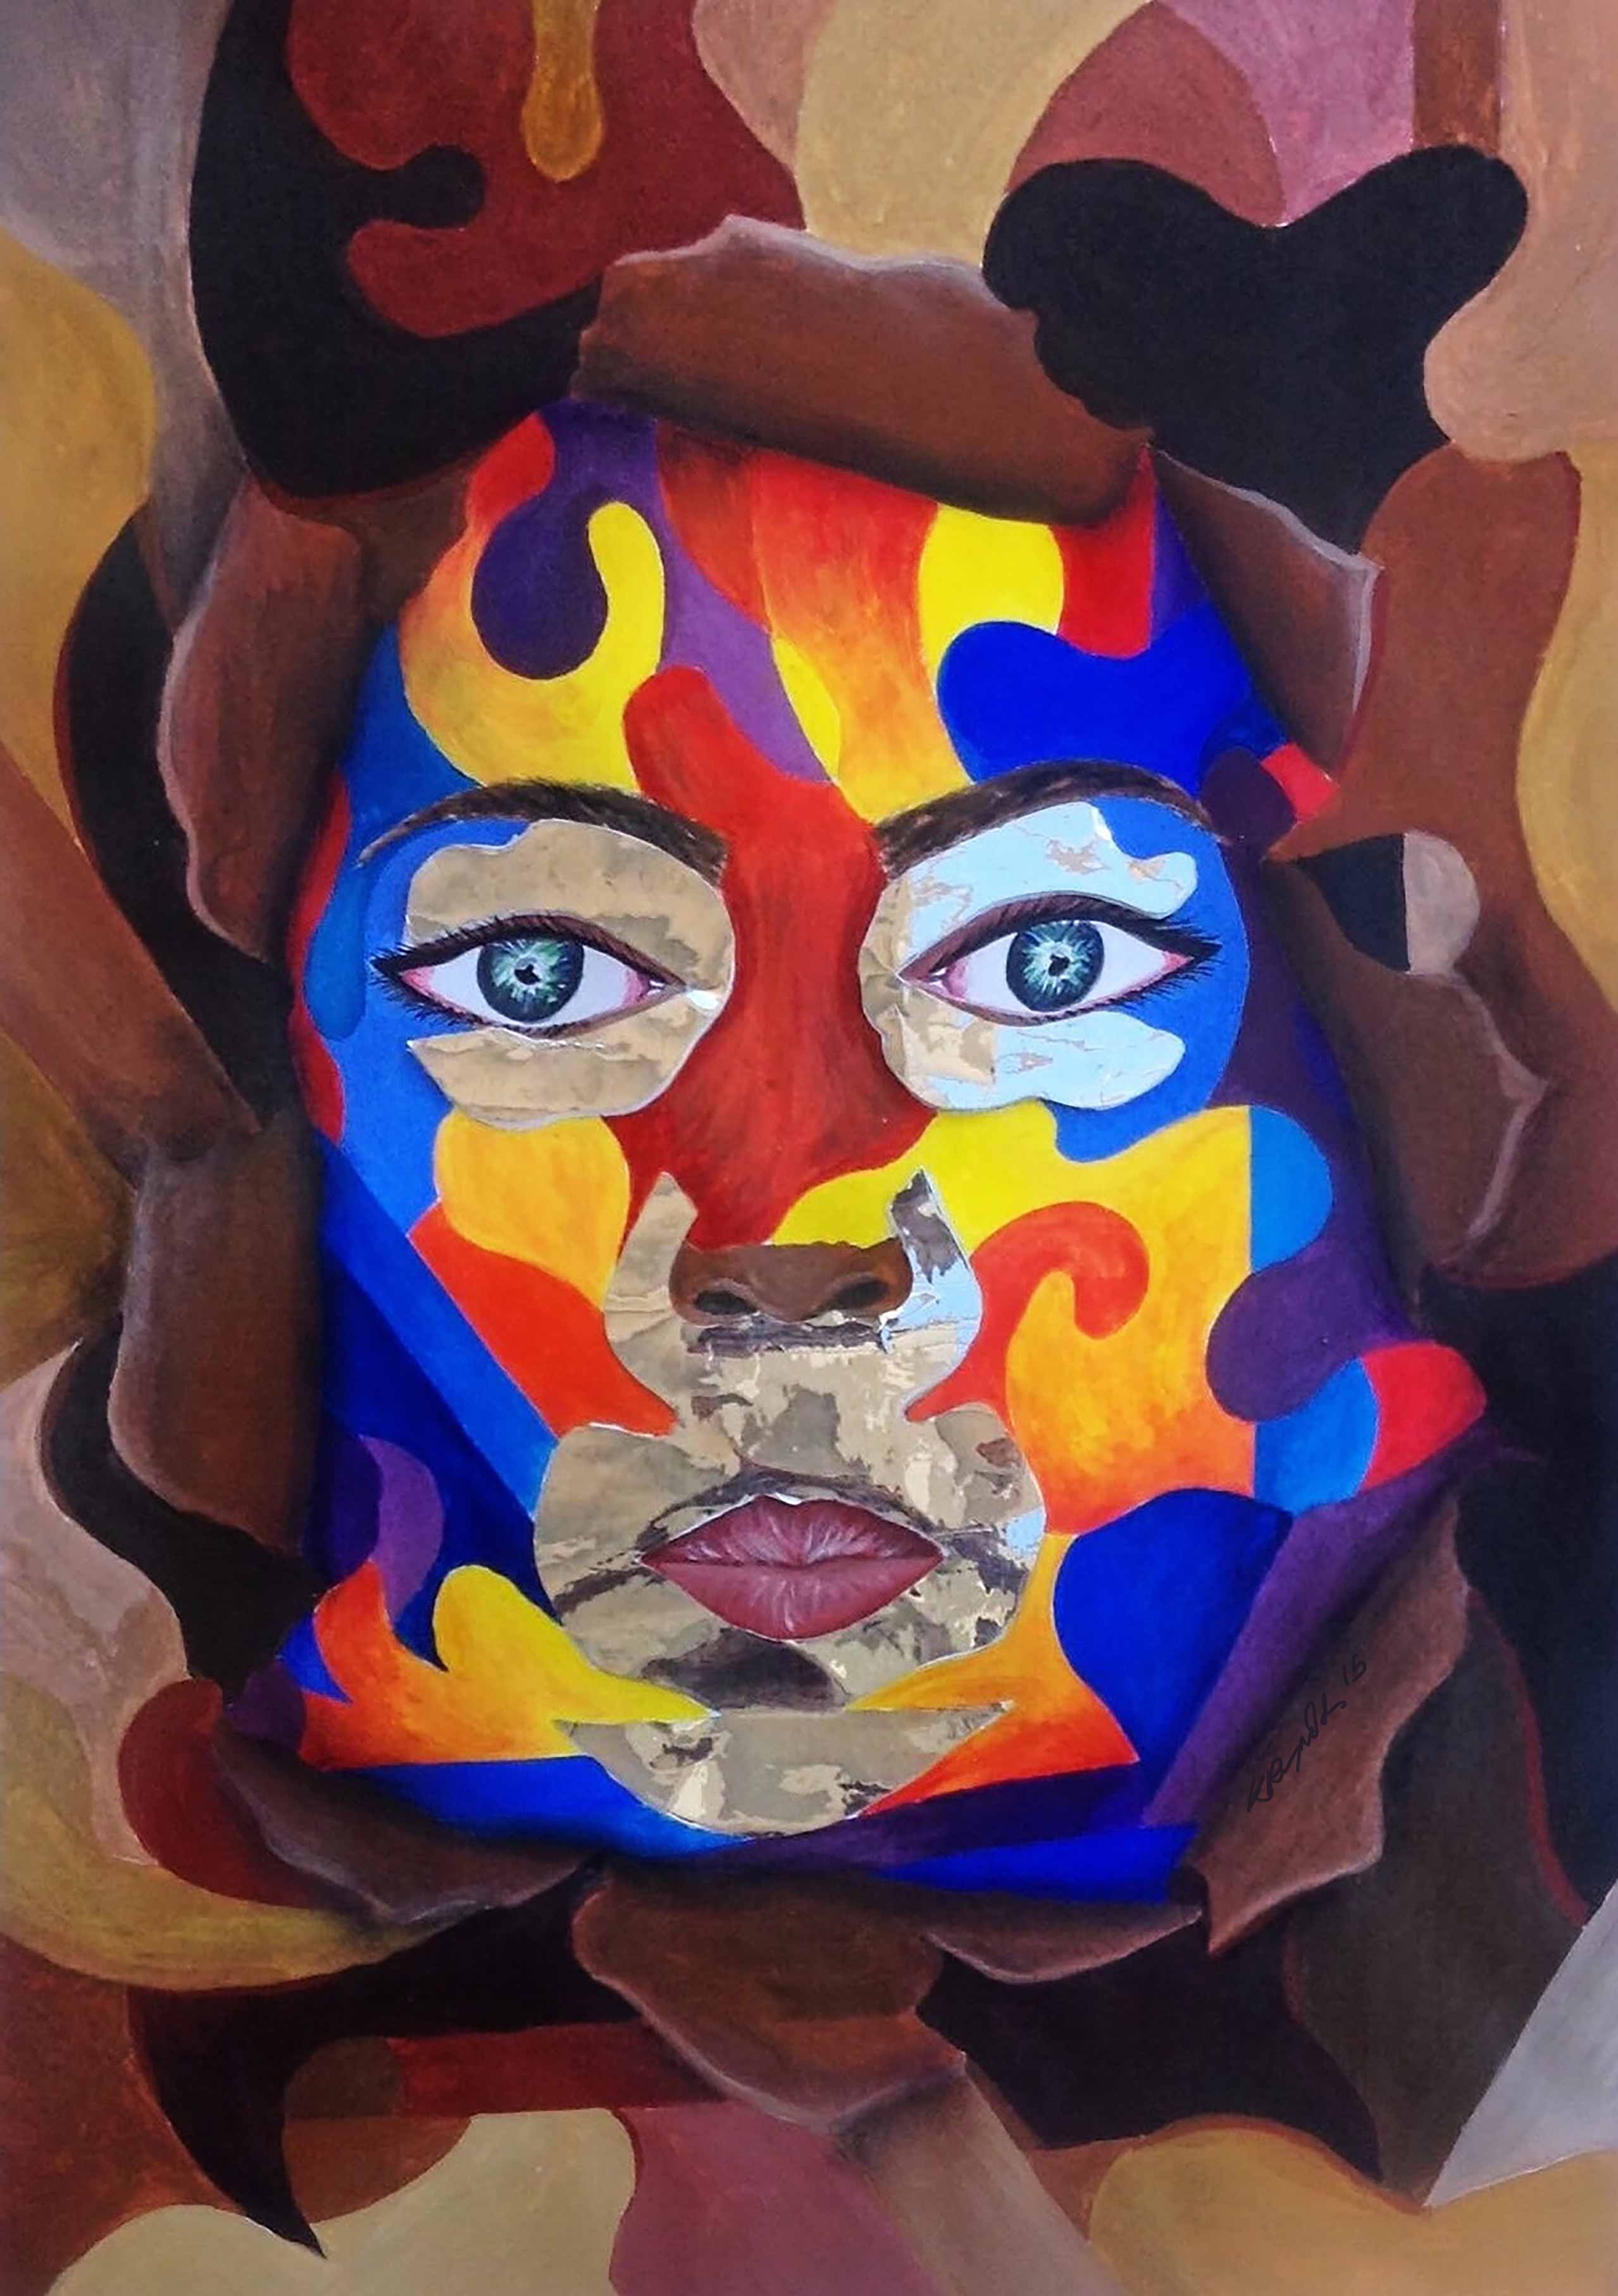 A face painted in bright colors with metallic accents appears in the center of the canvas